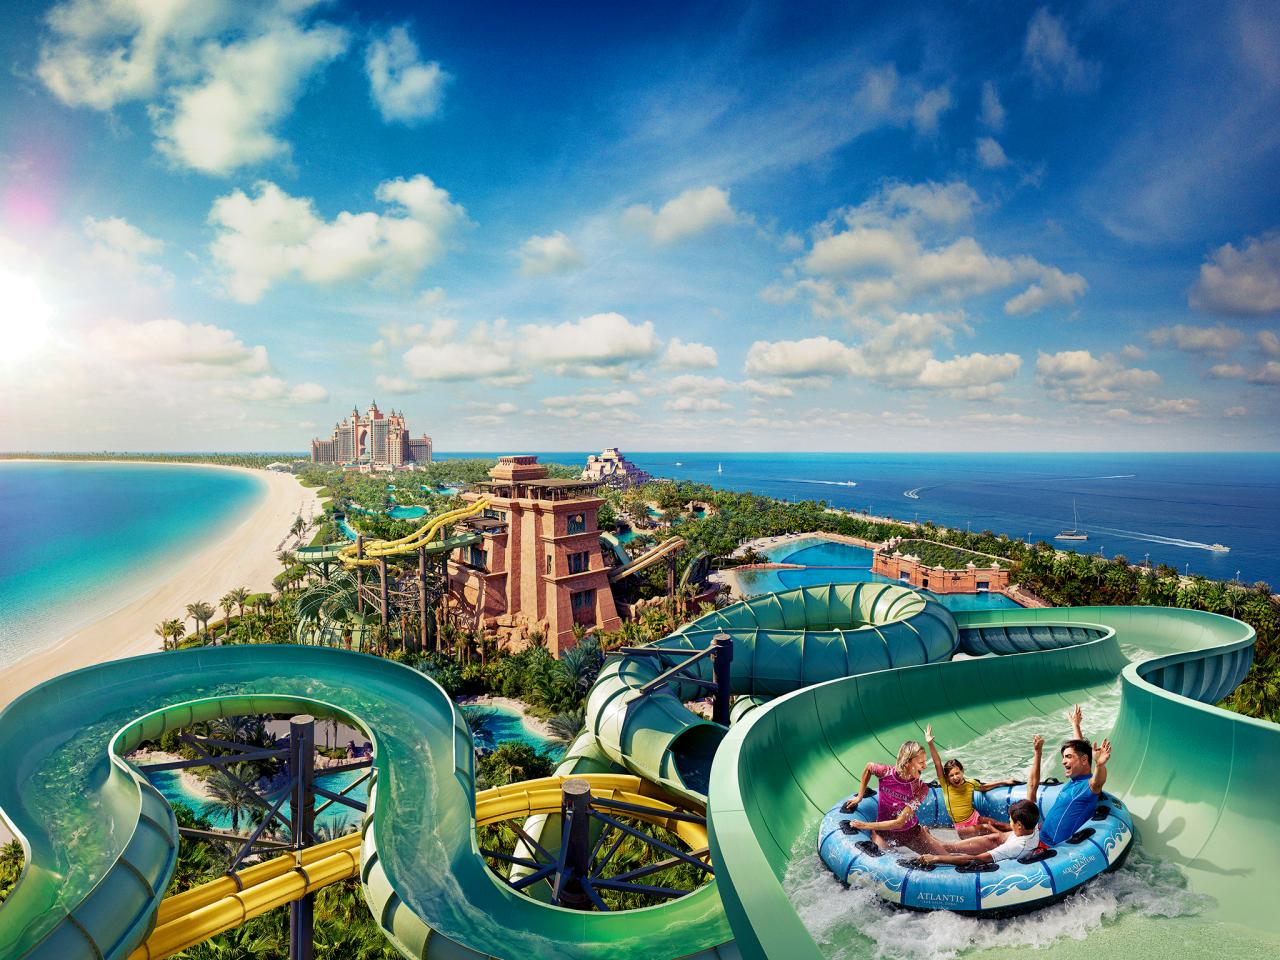 Seeking Thrills at the Largest Water Theme Park